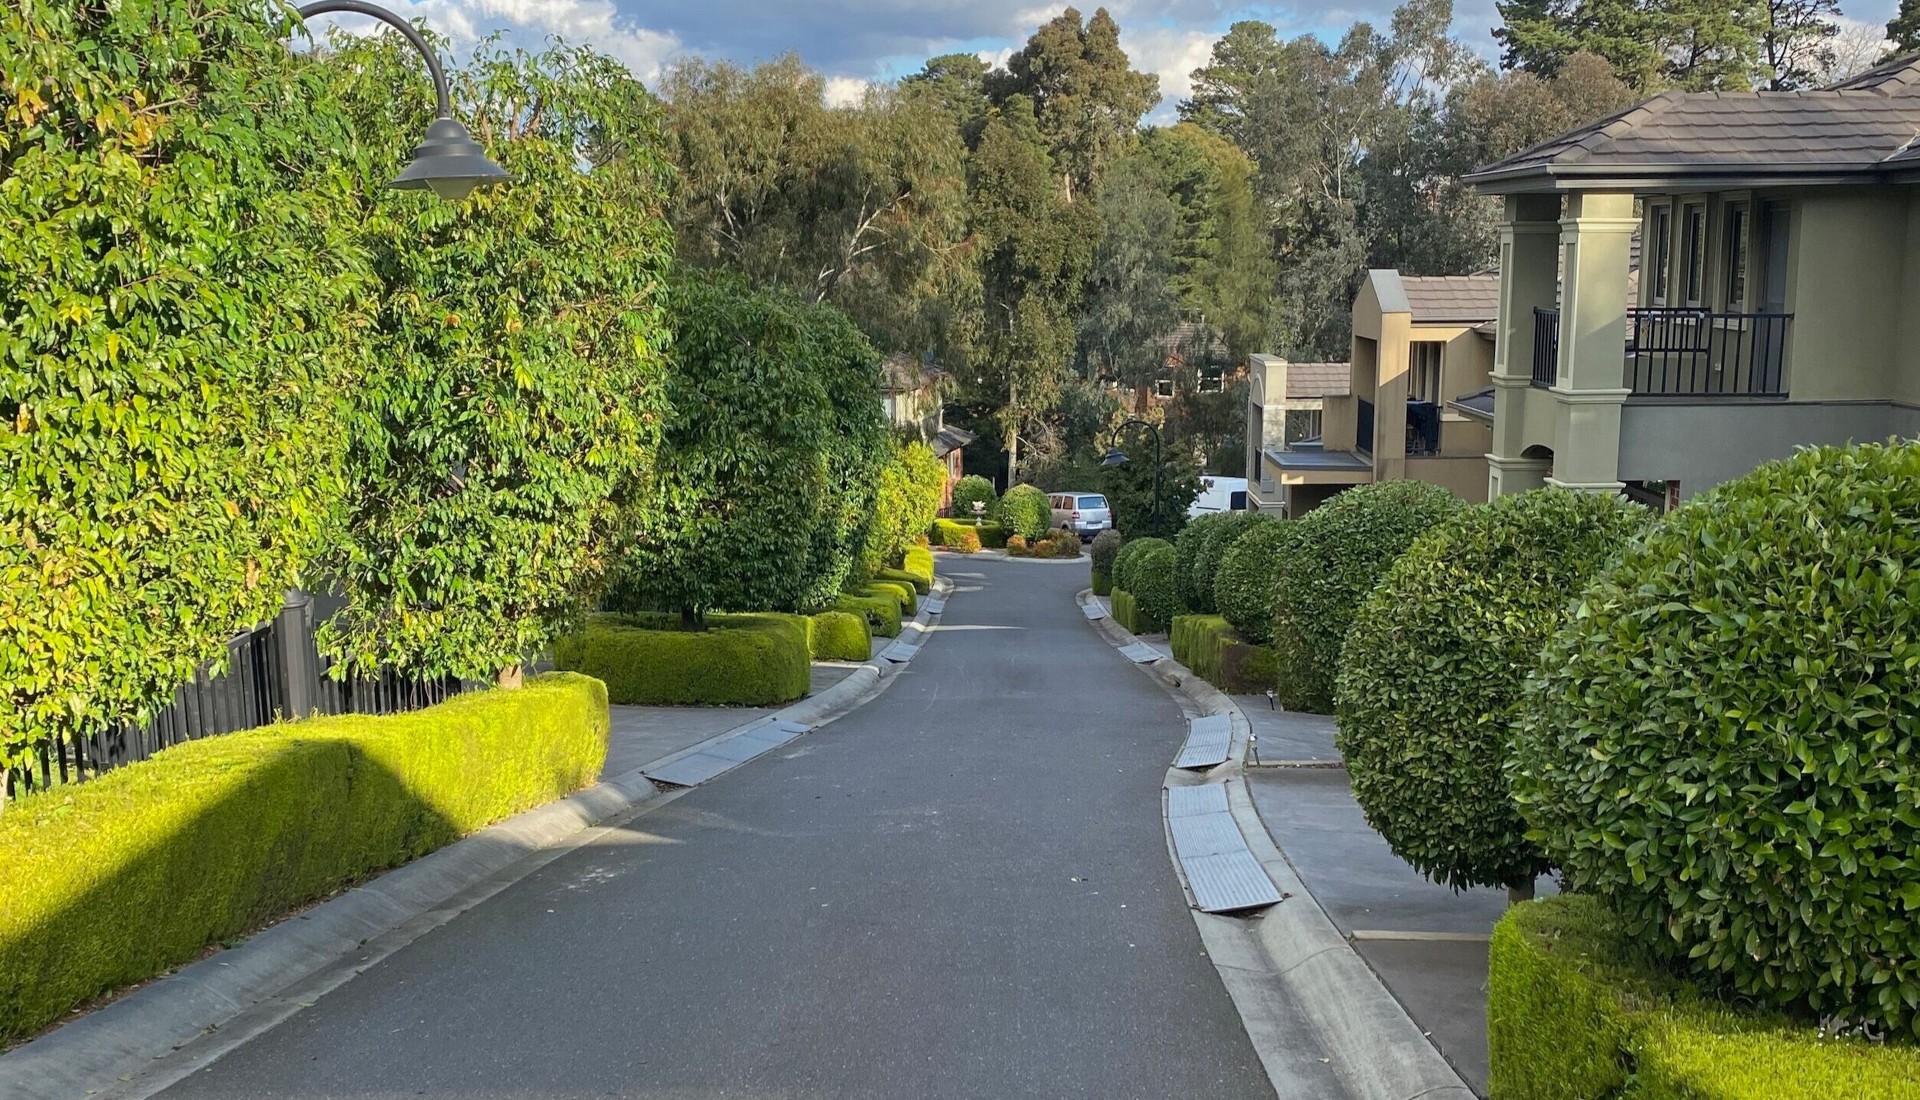 Trimmed hedges in a residential area.